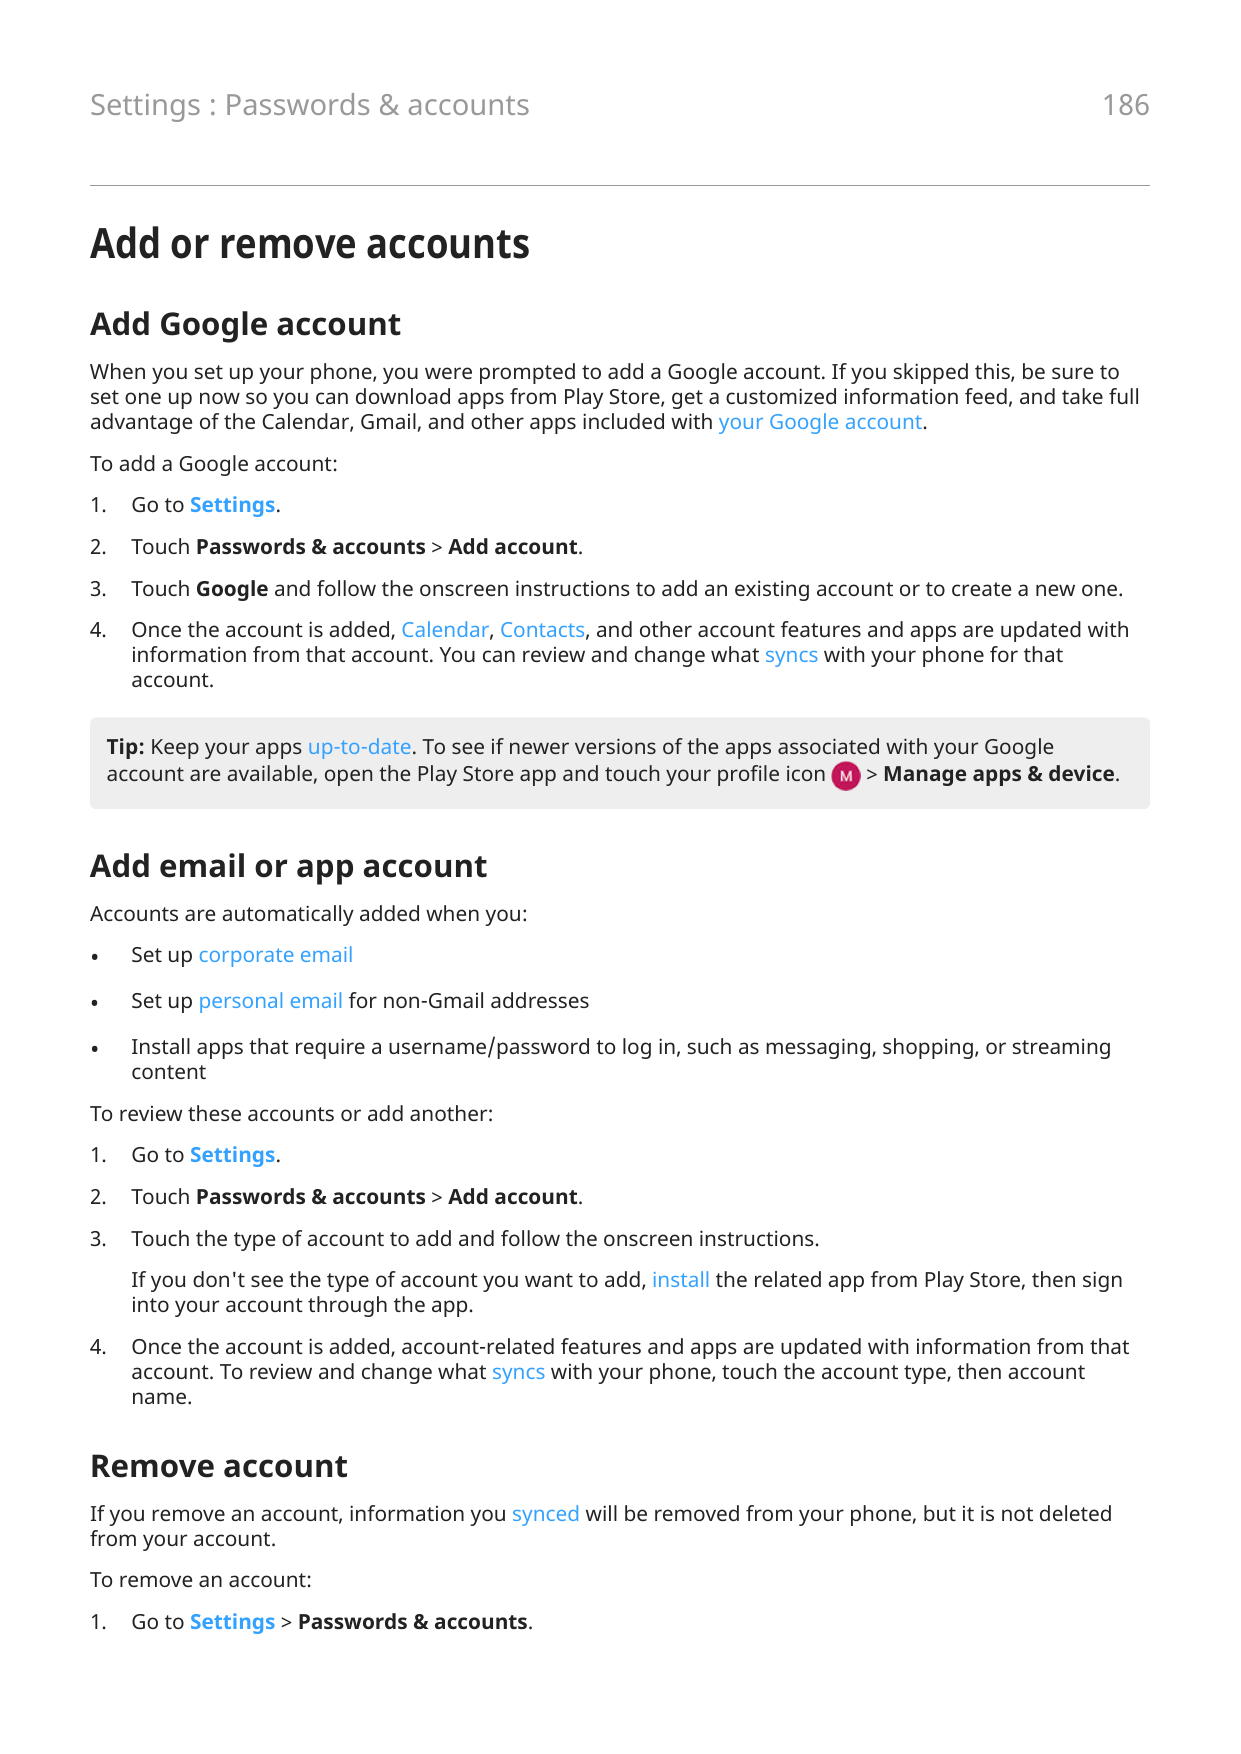 Settings : Passwords & accounts186Add or remove accountsAdd Google accountWhen you set up your phone, you were prompted to add a